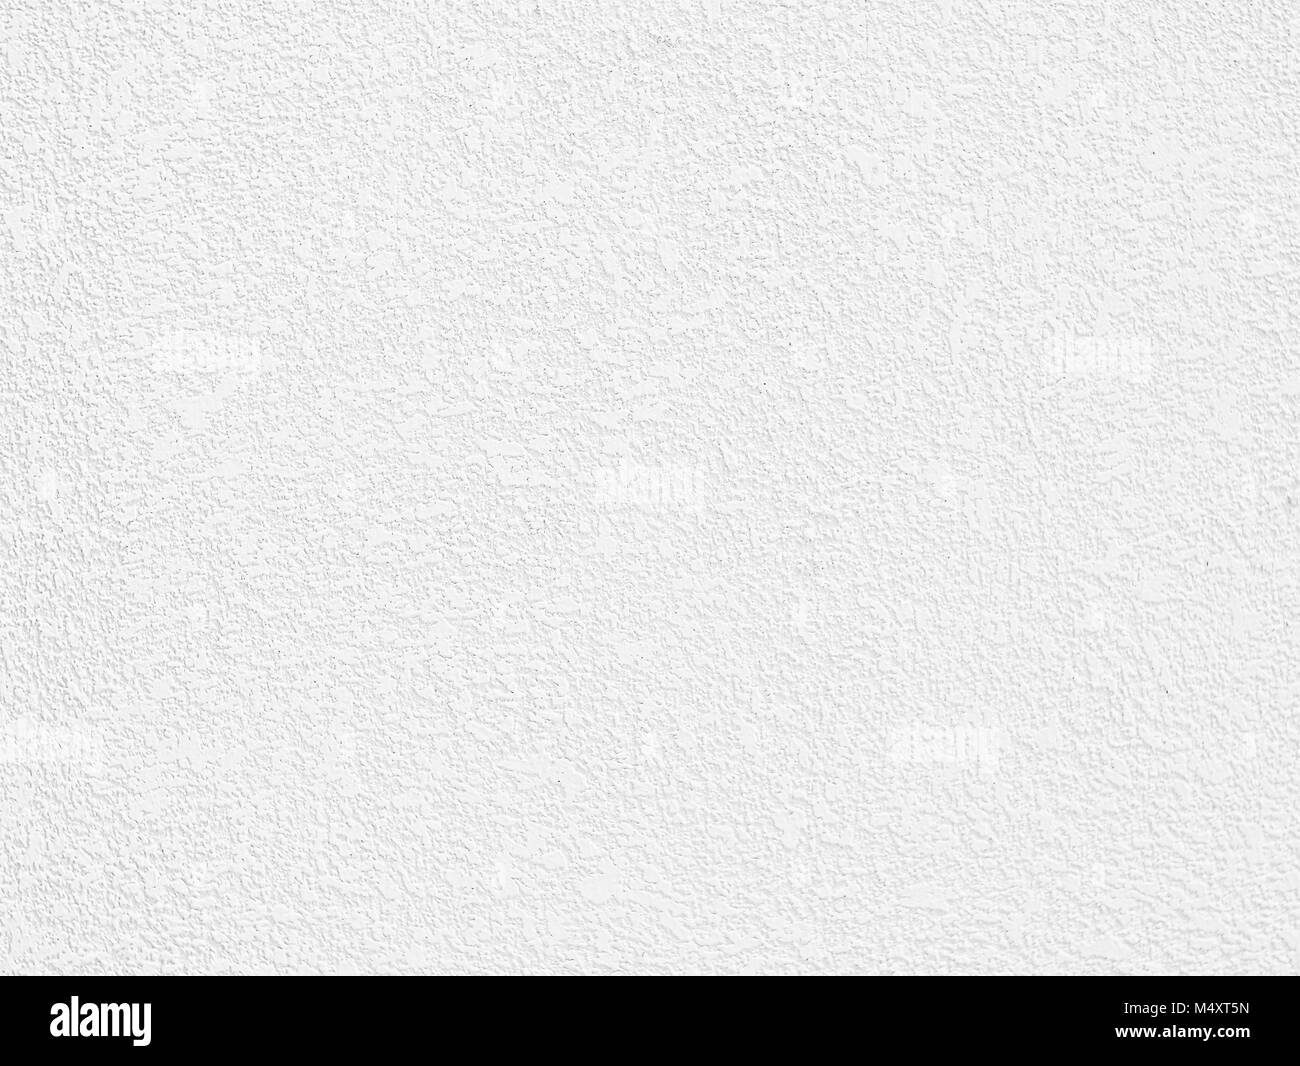 White Concrete Wall TextureBackground,flooring for text, images, websites, websites or graphics for commercial campaigns. Stock Photo